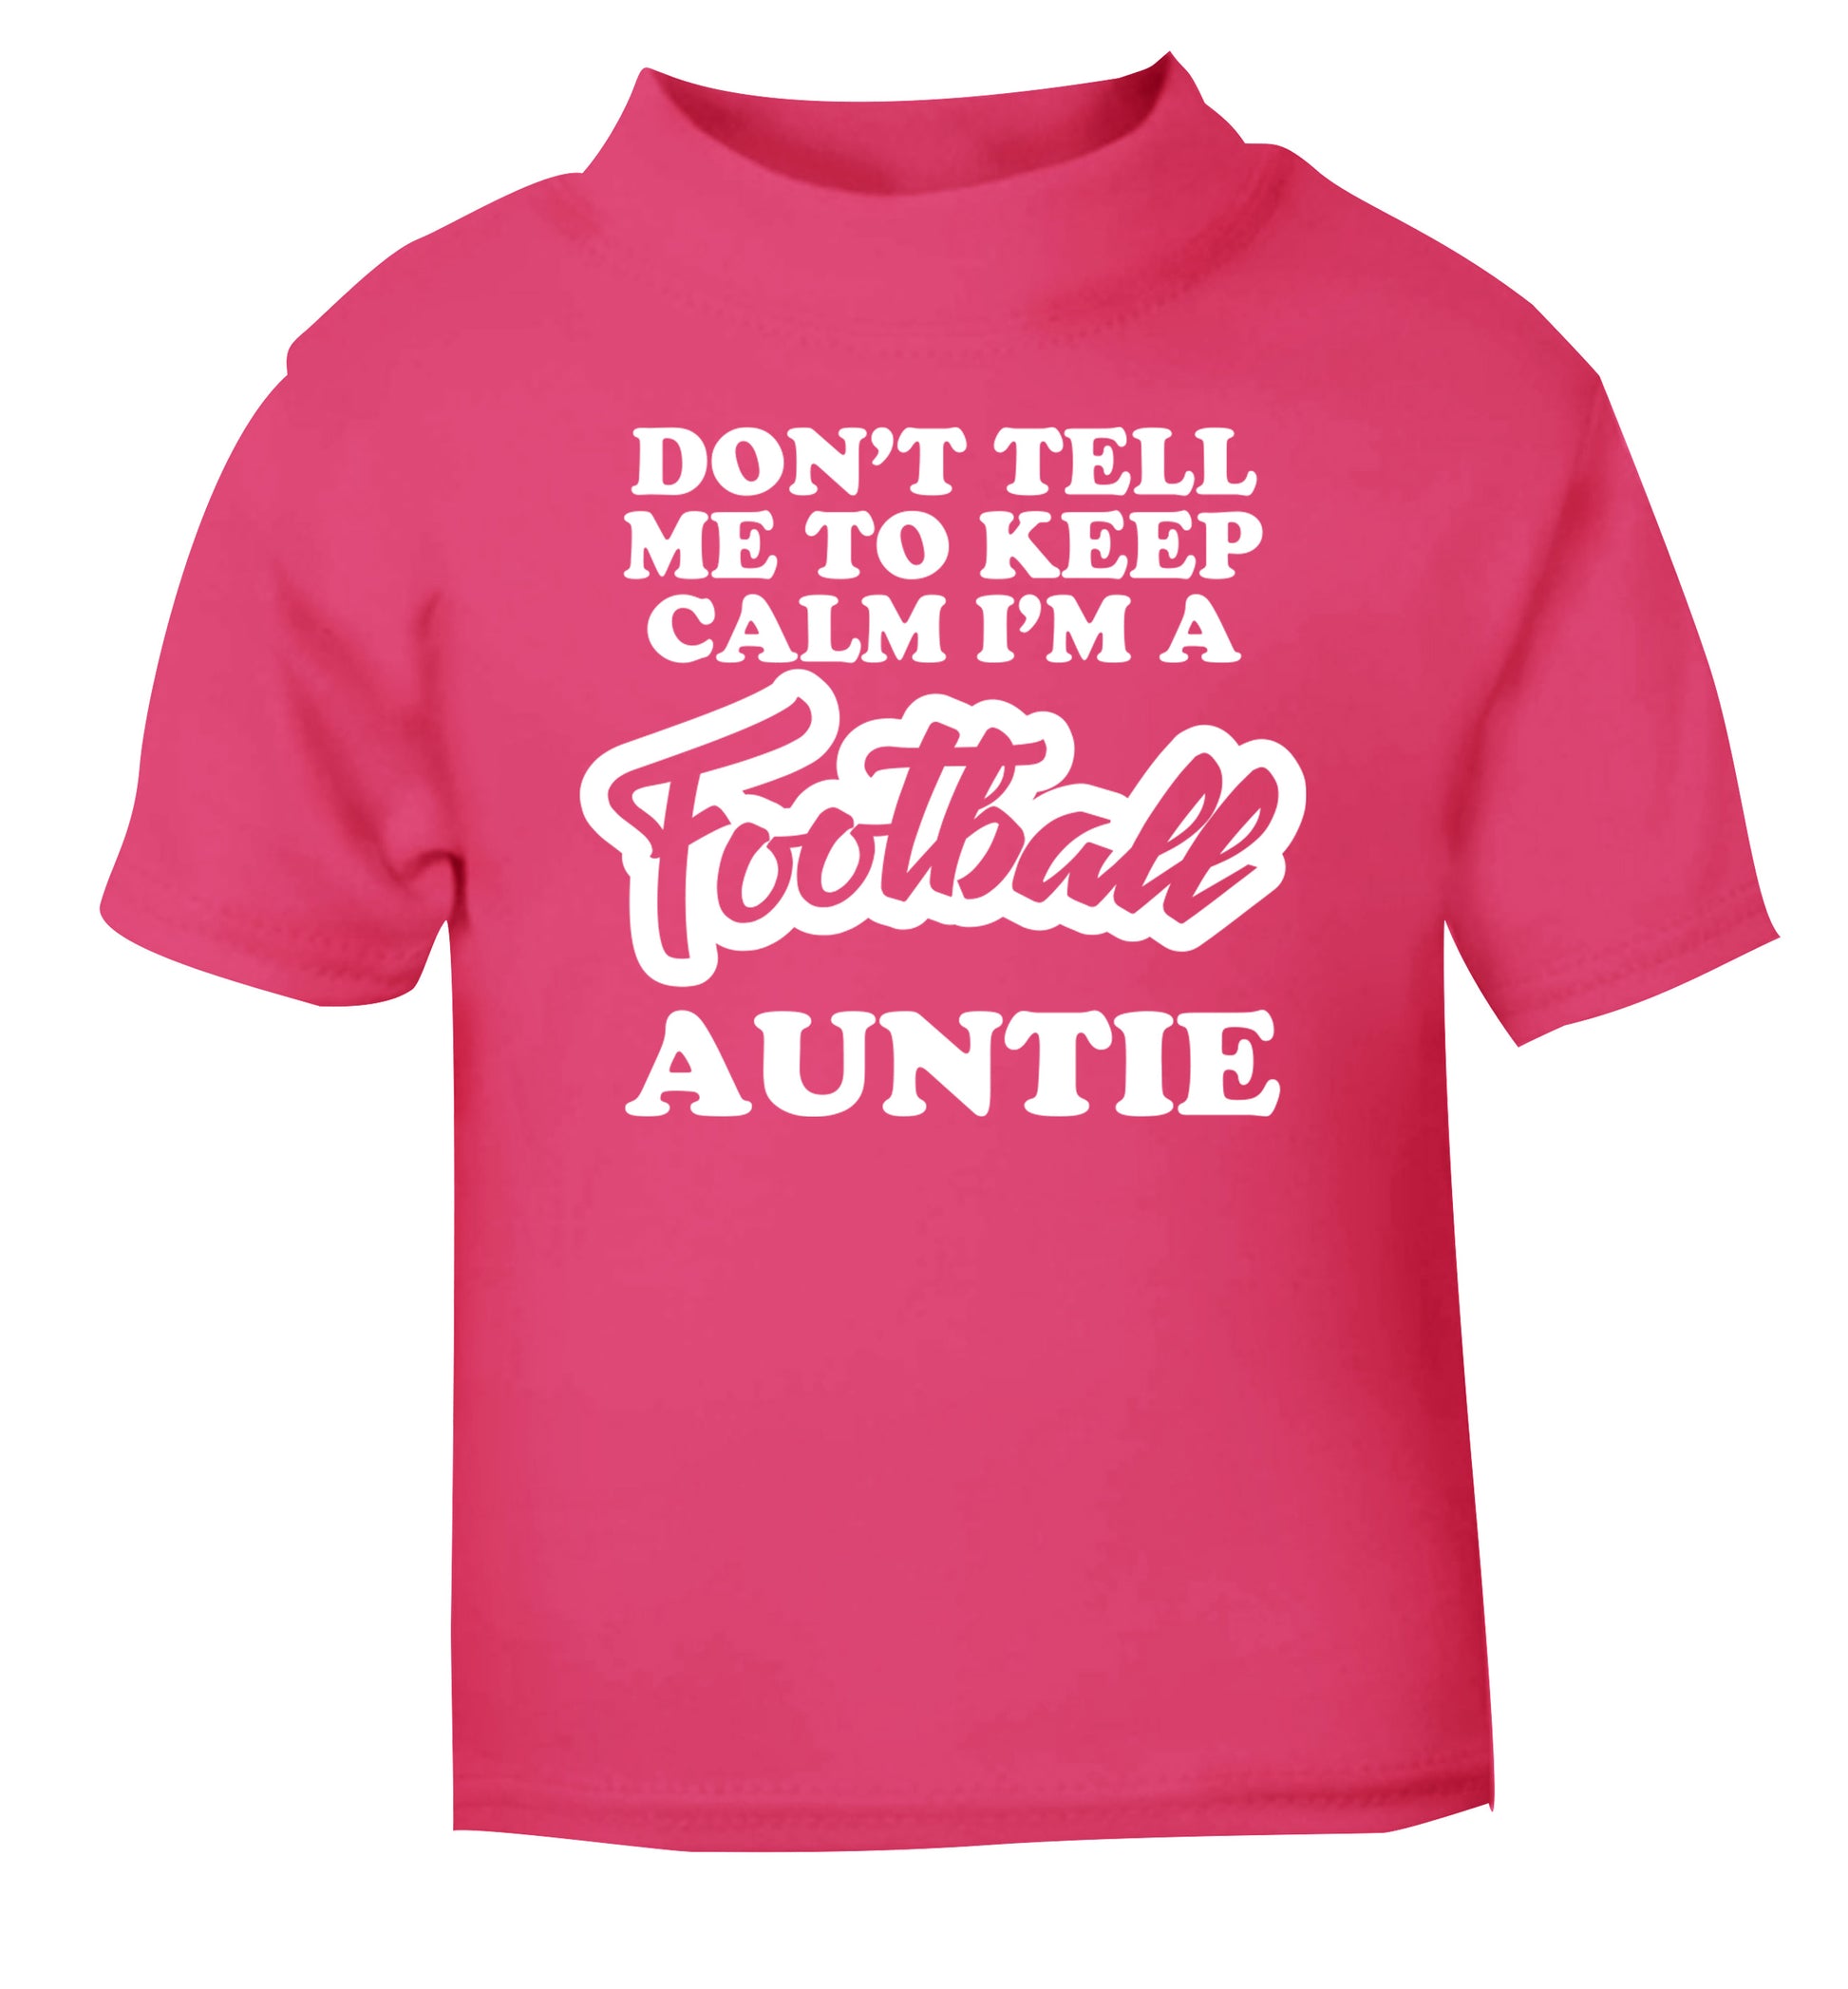 Don't tell me to keep calm I'm a football auntie pink Baby Toddler Tshirt 2 Years